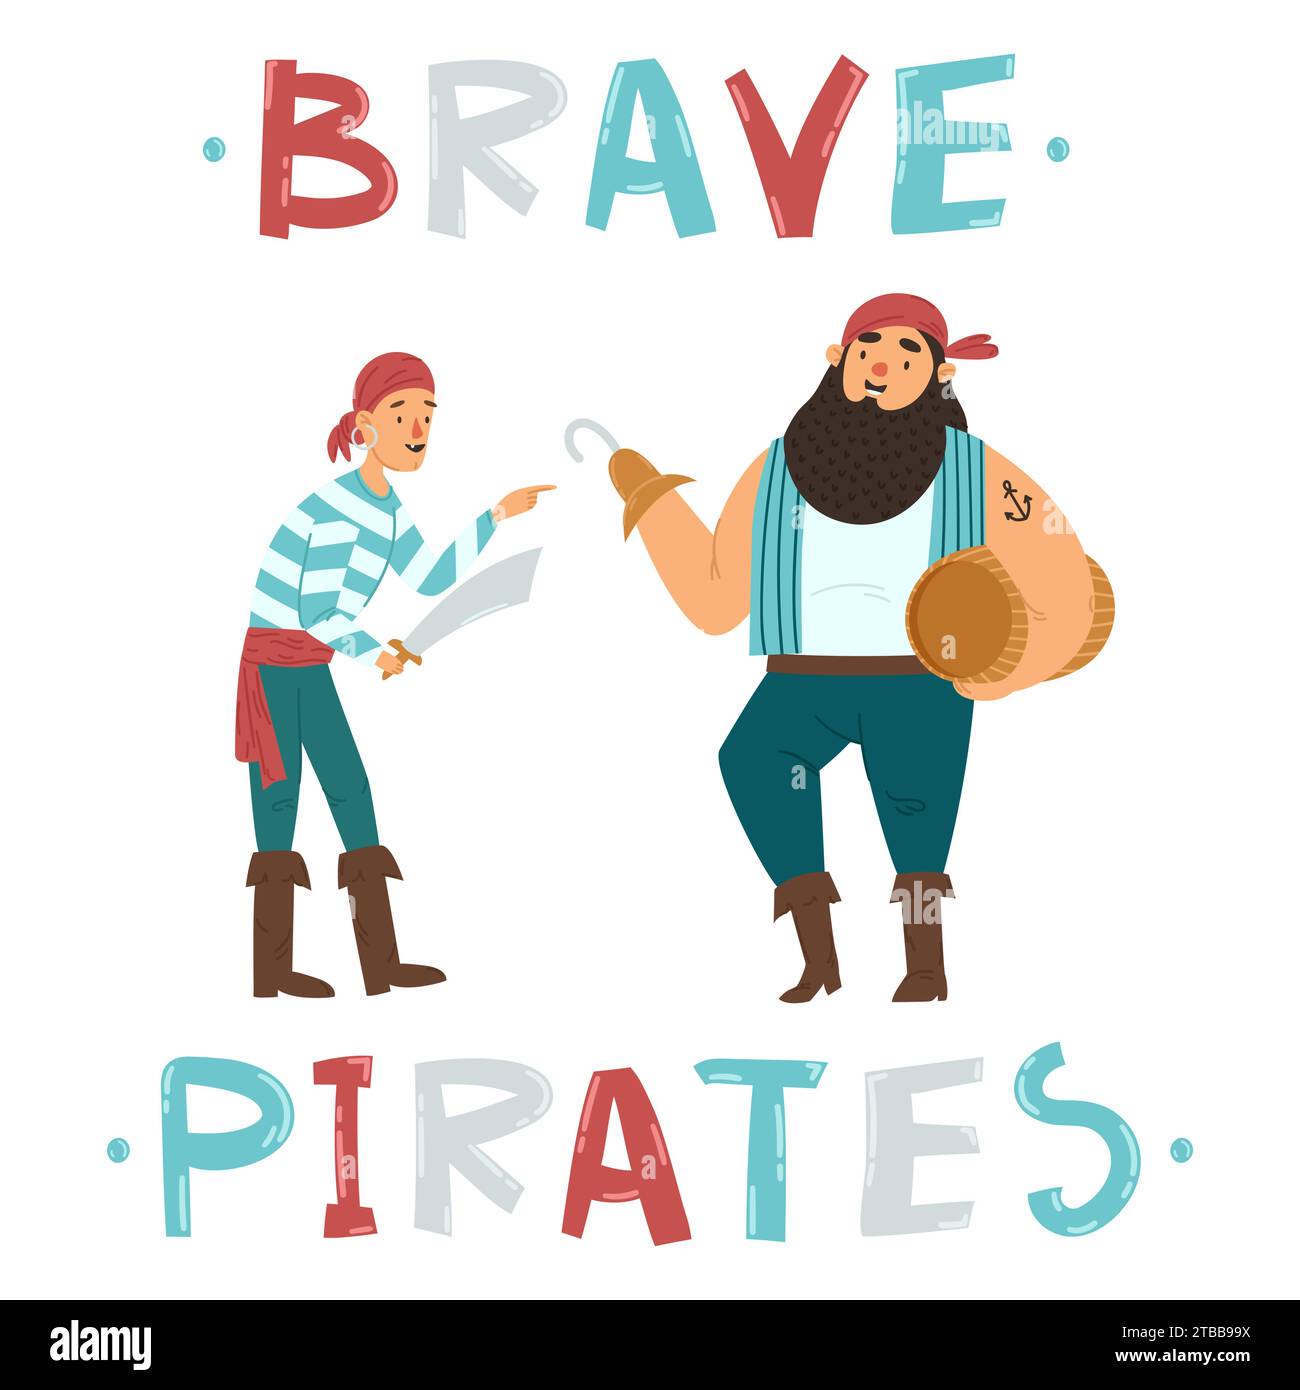 Huge happy one-armed pirate and skinny drunk cabin boy with a sword. Brave pirates hand drawn text. Anchor tattoo on arm. Vector character illustratio Stock Vector